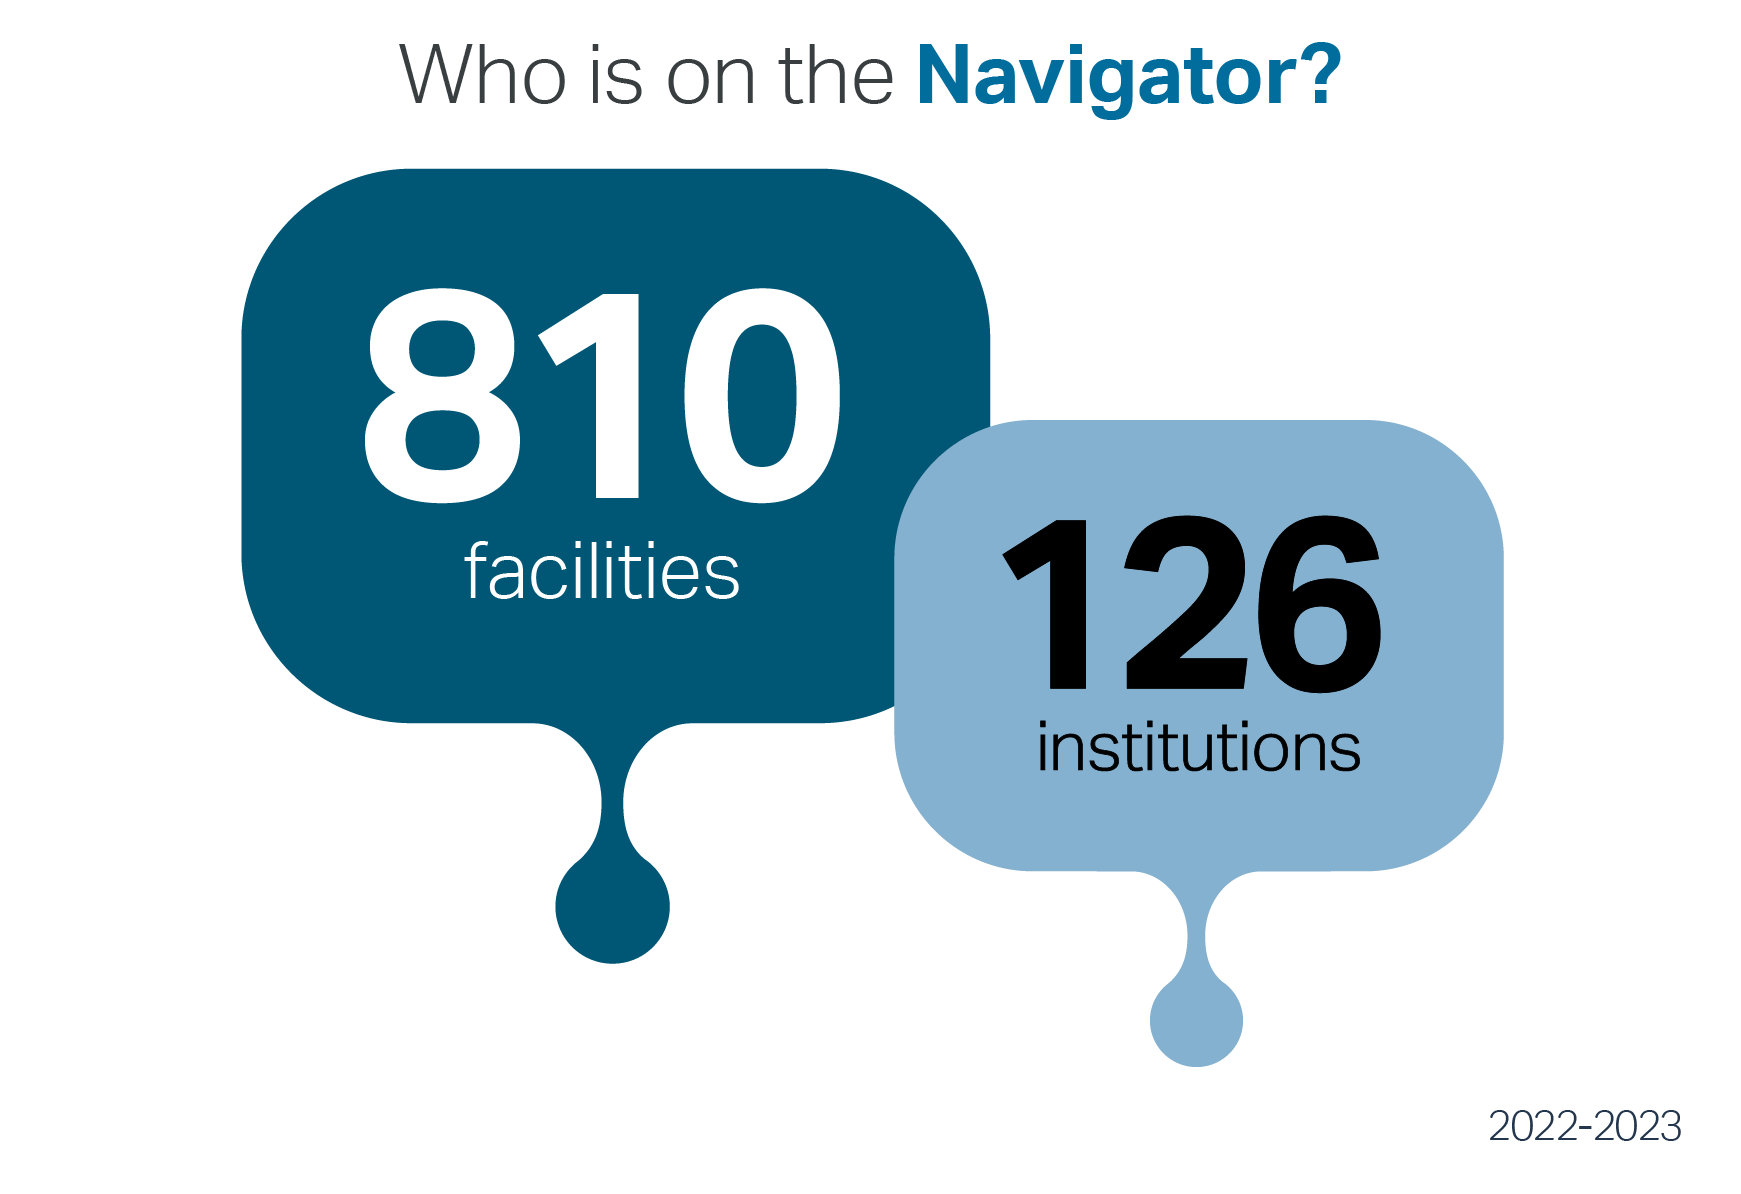 810 total facilities, 126 total institutions